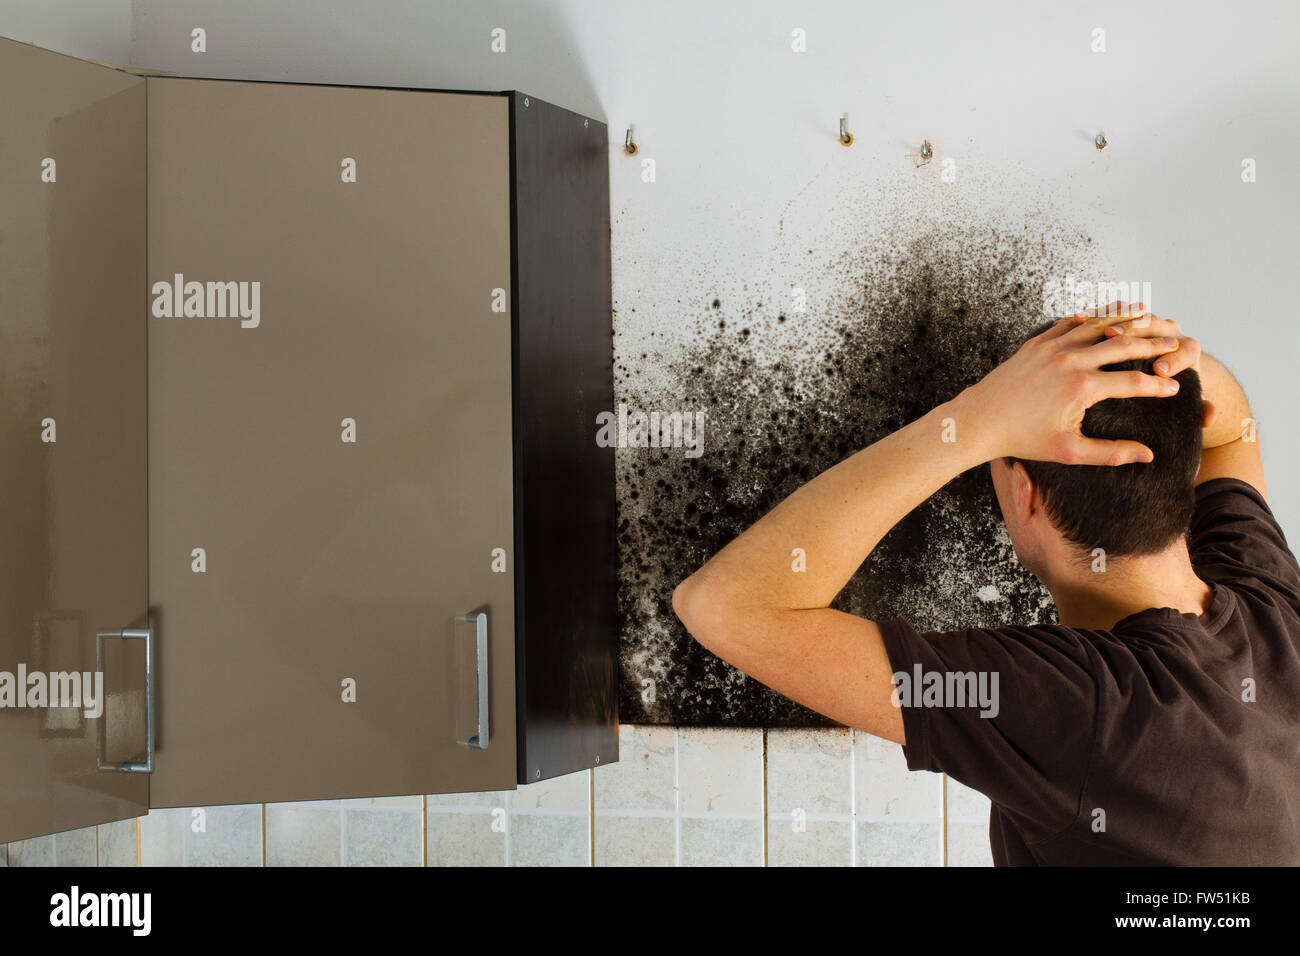 Man shocked to mold a kitchen cabinet. Stock Photo